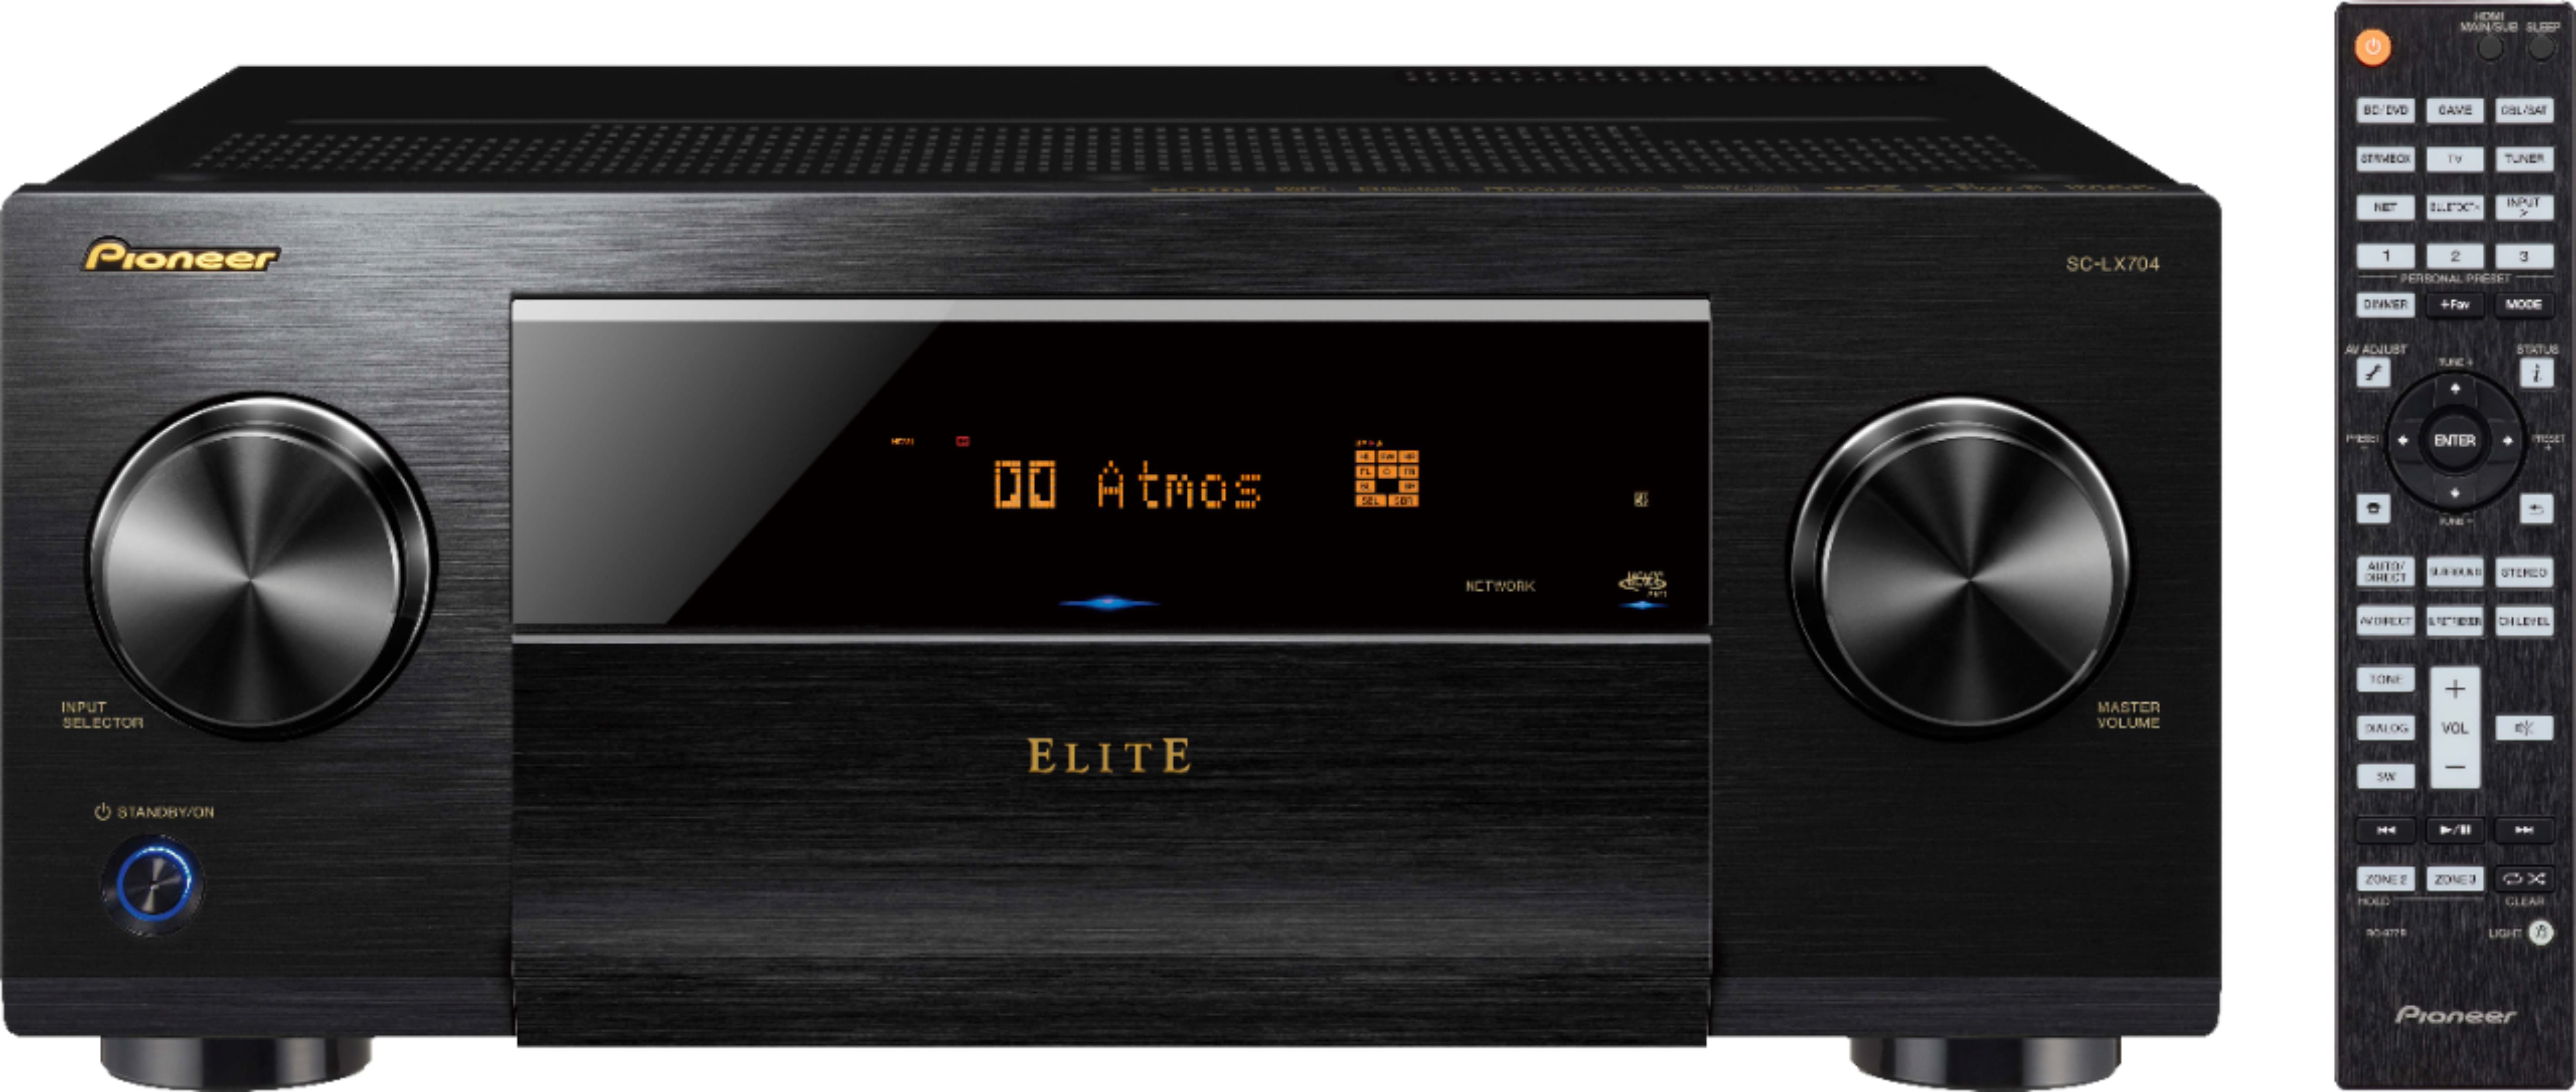 Pioneer - Elite 760W 9.2-Ch. Bluetooth Capable with Dolby Atmos 4K Ultra HD HDR Compatible A/V Home Theater Receiver - Black